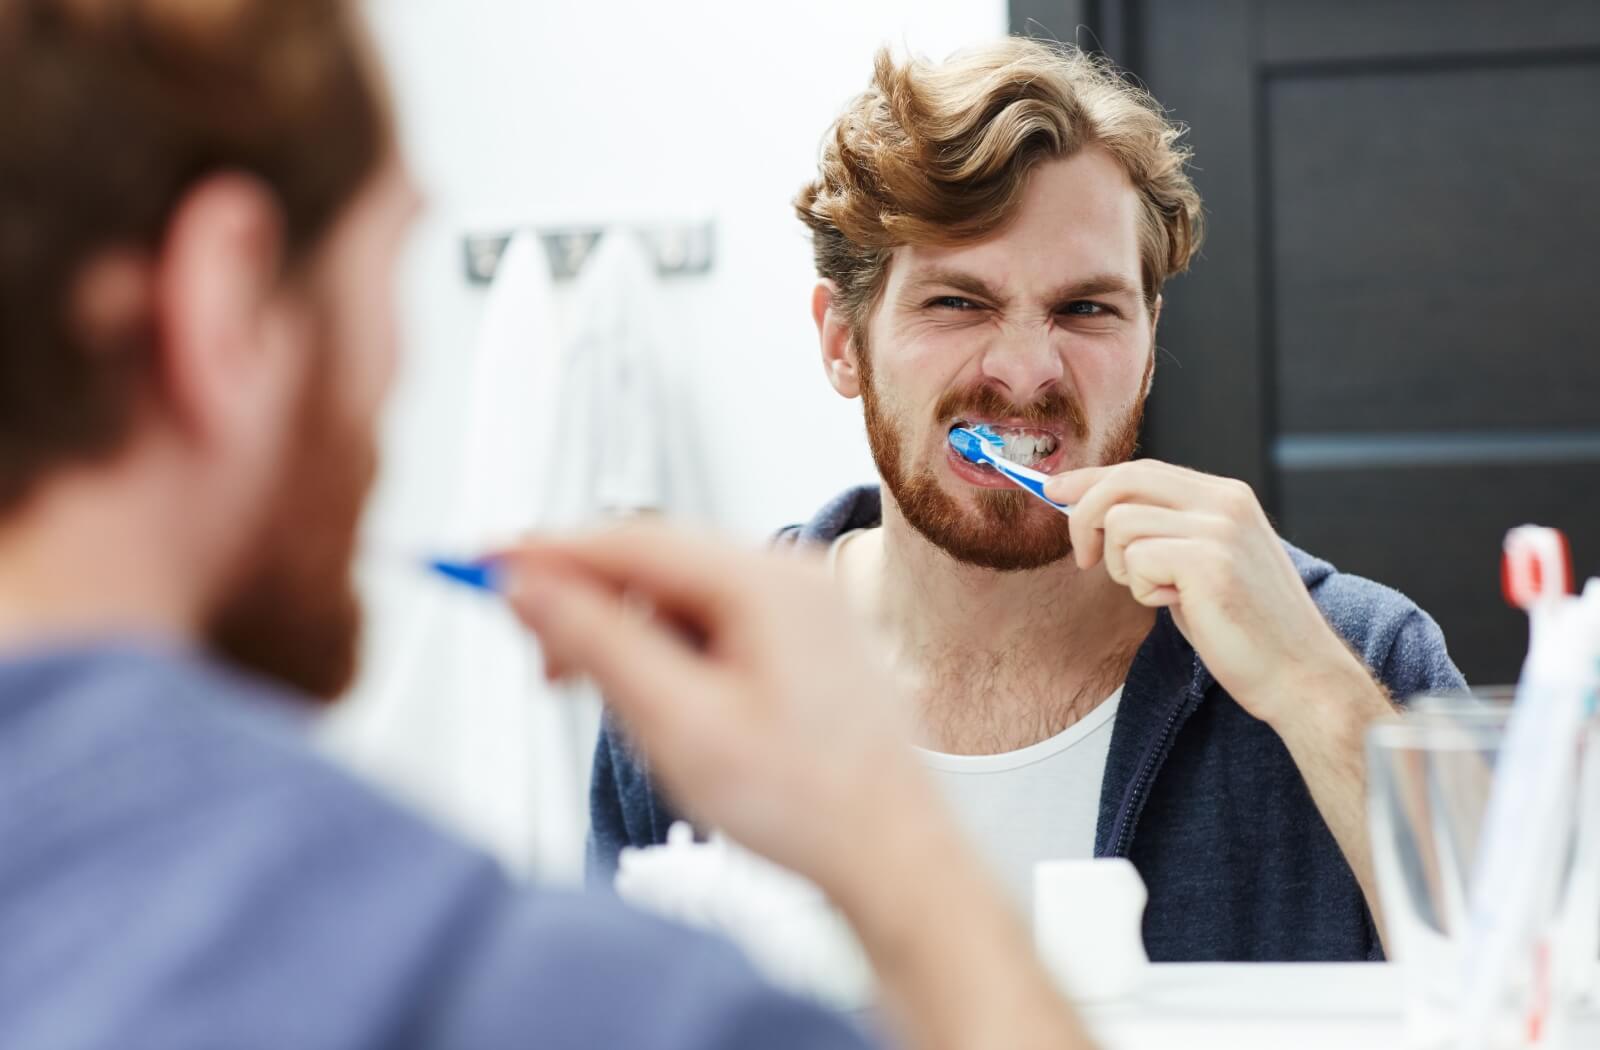 A man brushing his teeth using a blue toothbrush in front of a mirror.
